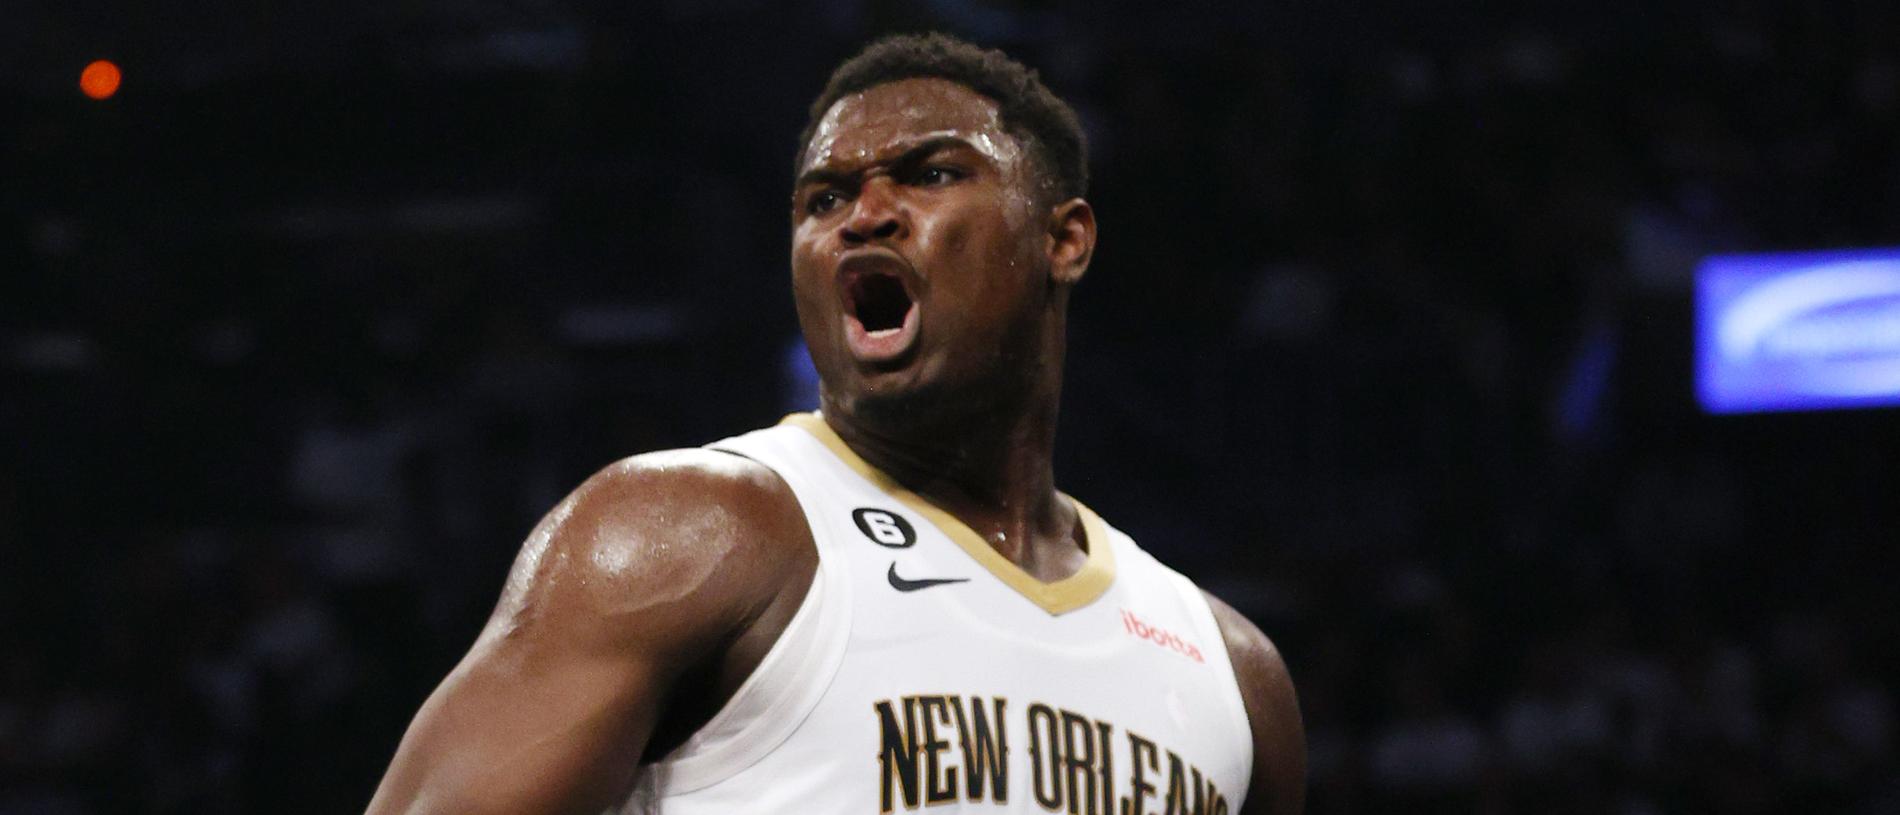 Zion Williamson earns player of the - New Orleans Pelicans